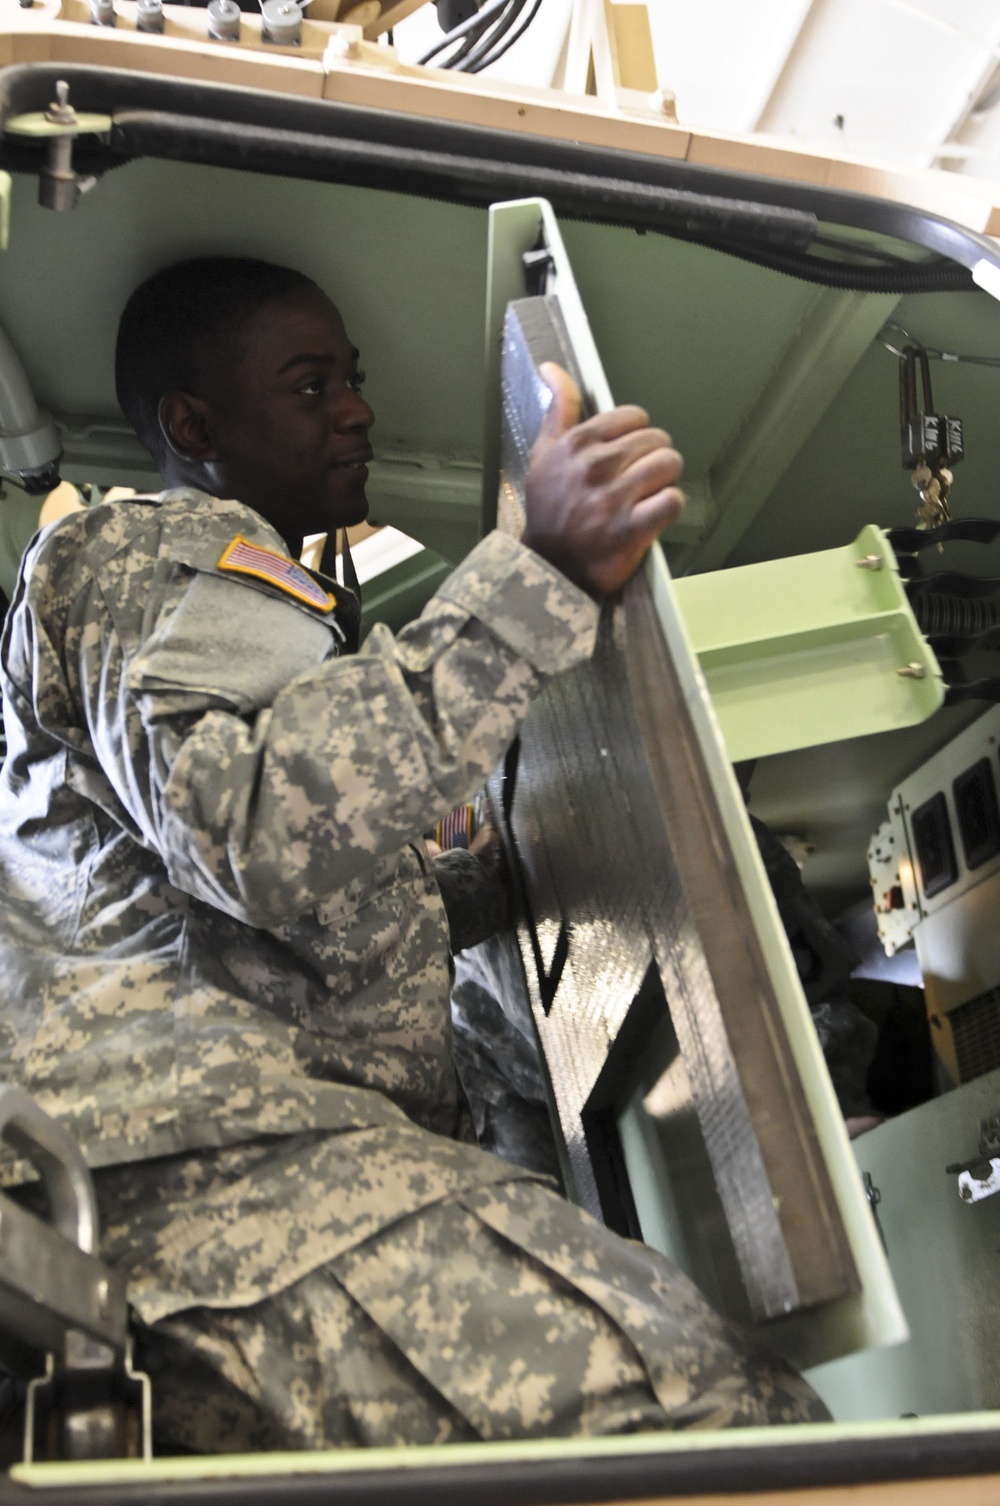 Bastogne receives new Armored Knights